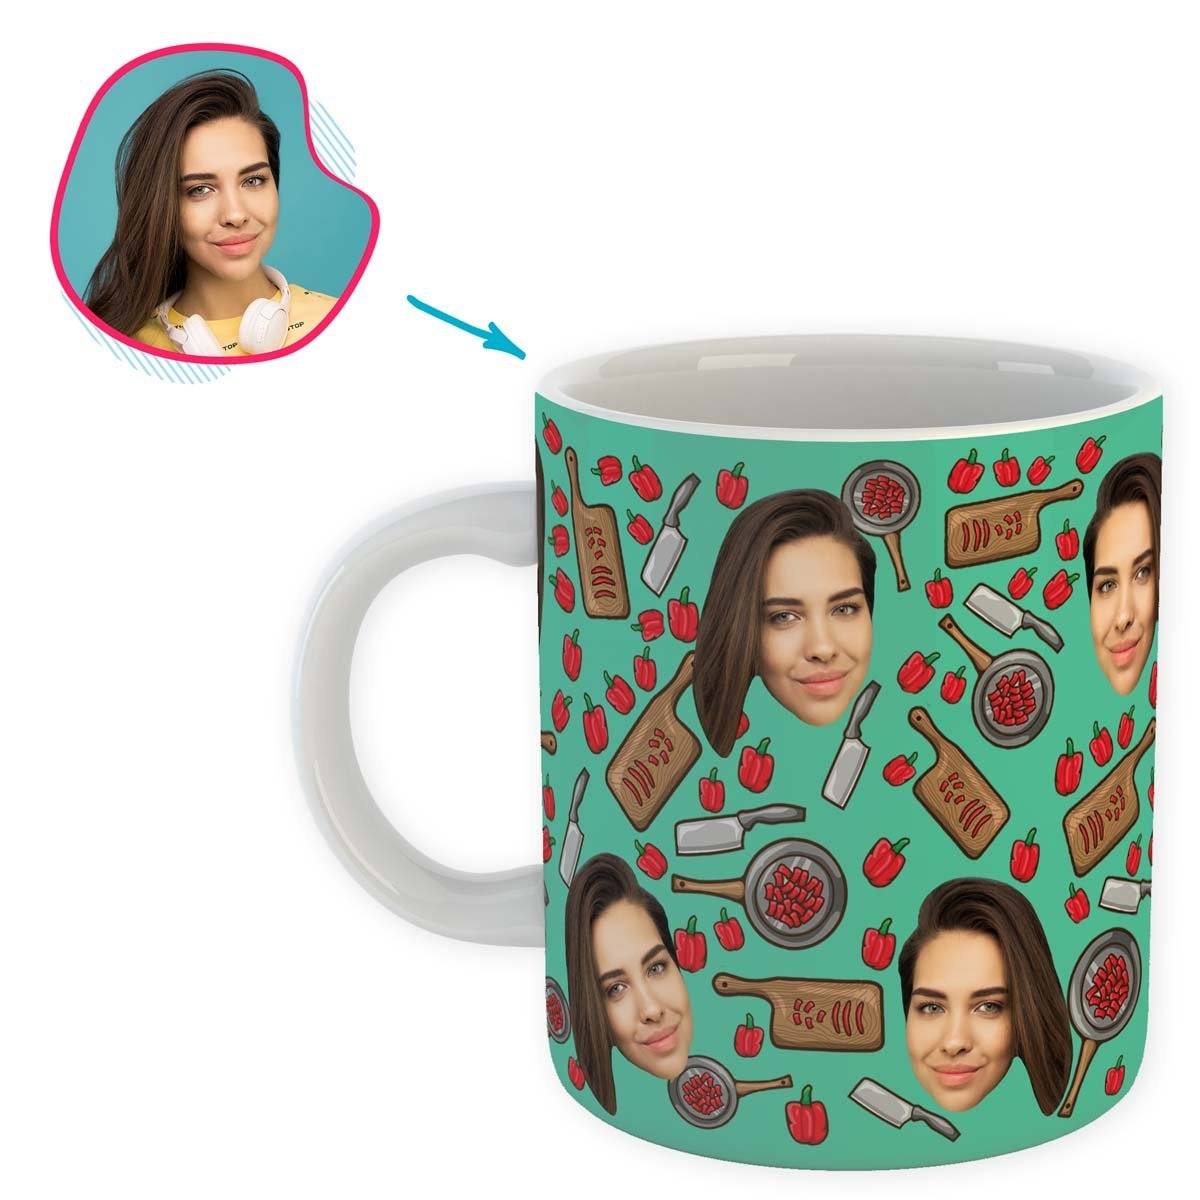 mint Сooking mug personalized with photo of face printed on it